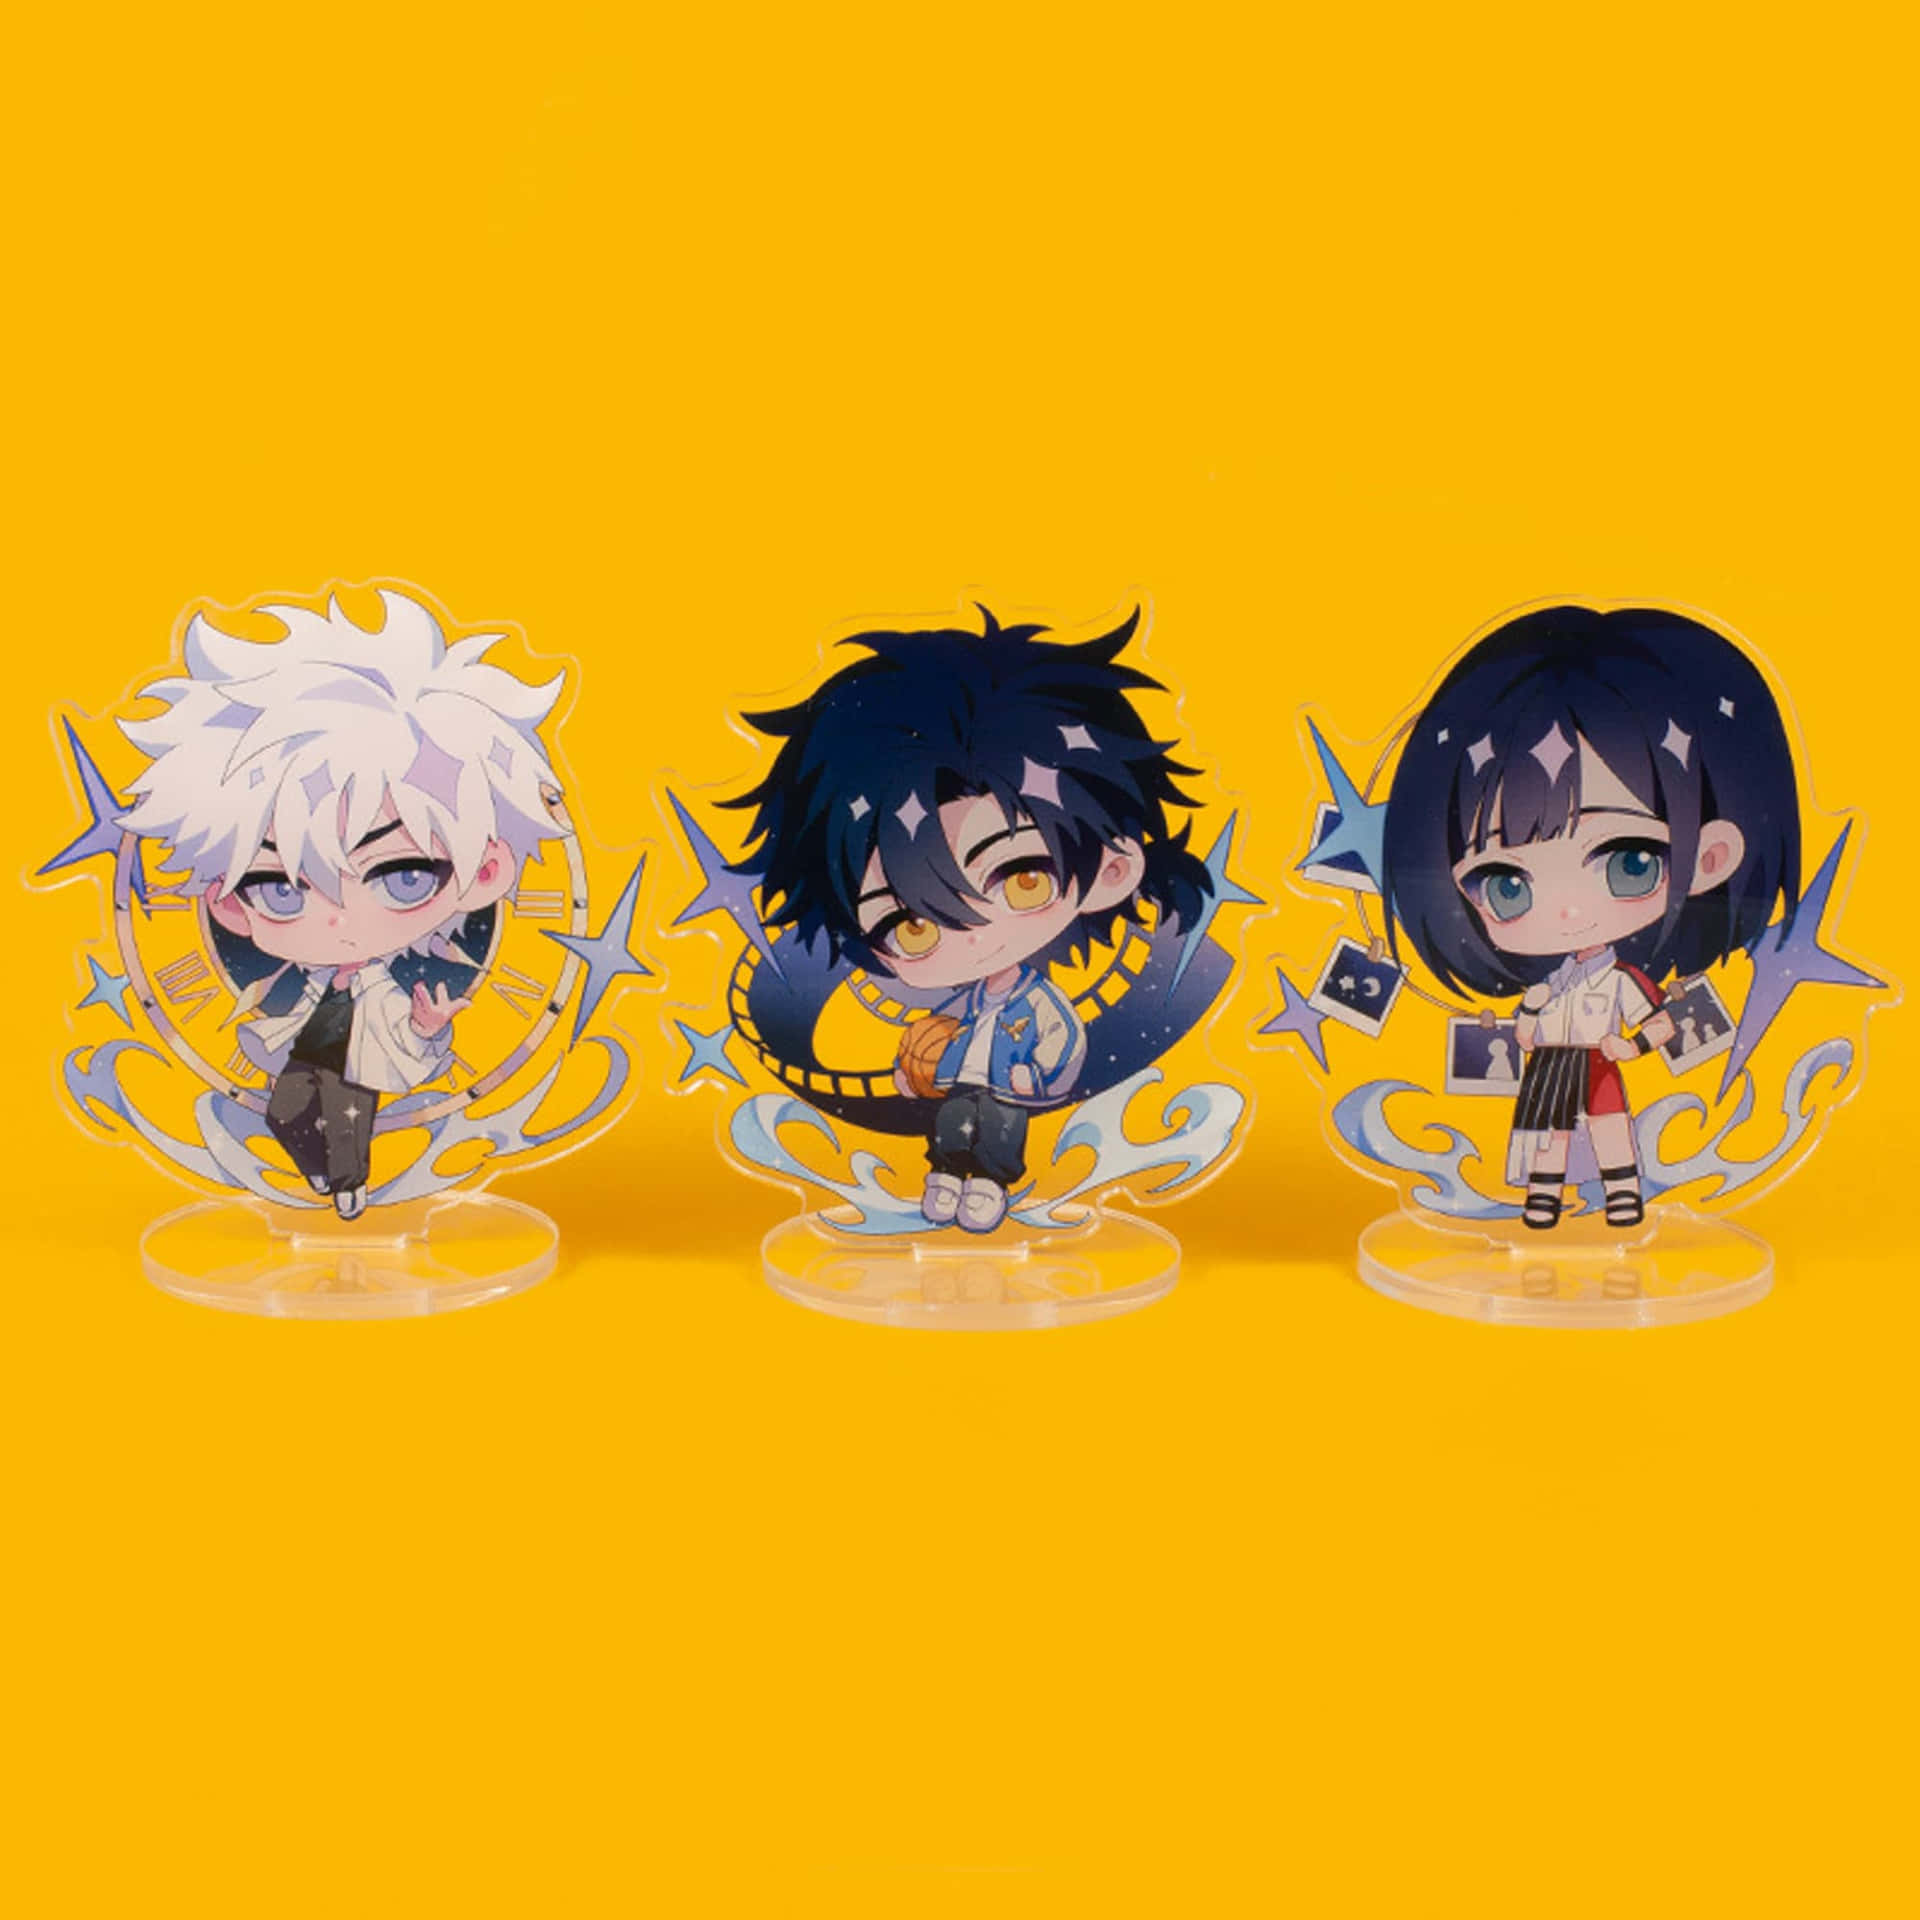 Anime Chibi Character Standees Yellow Background Wallpaper